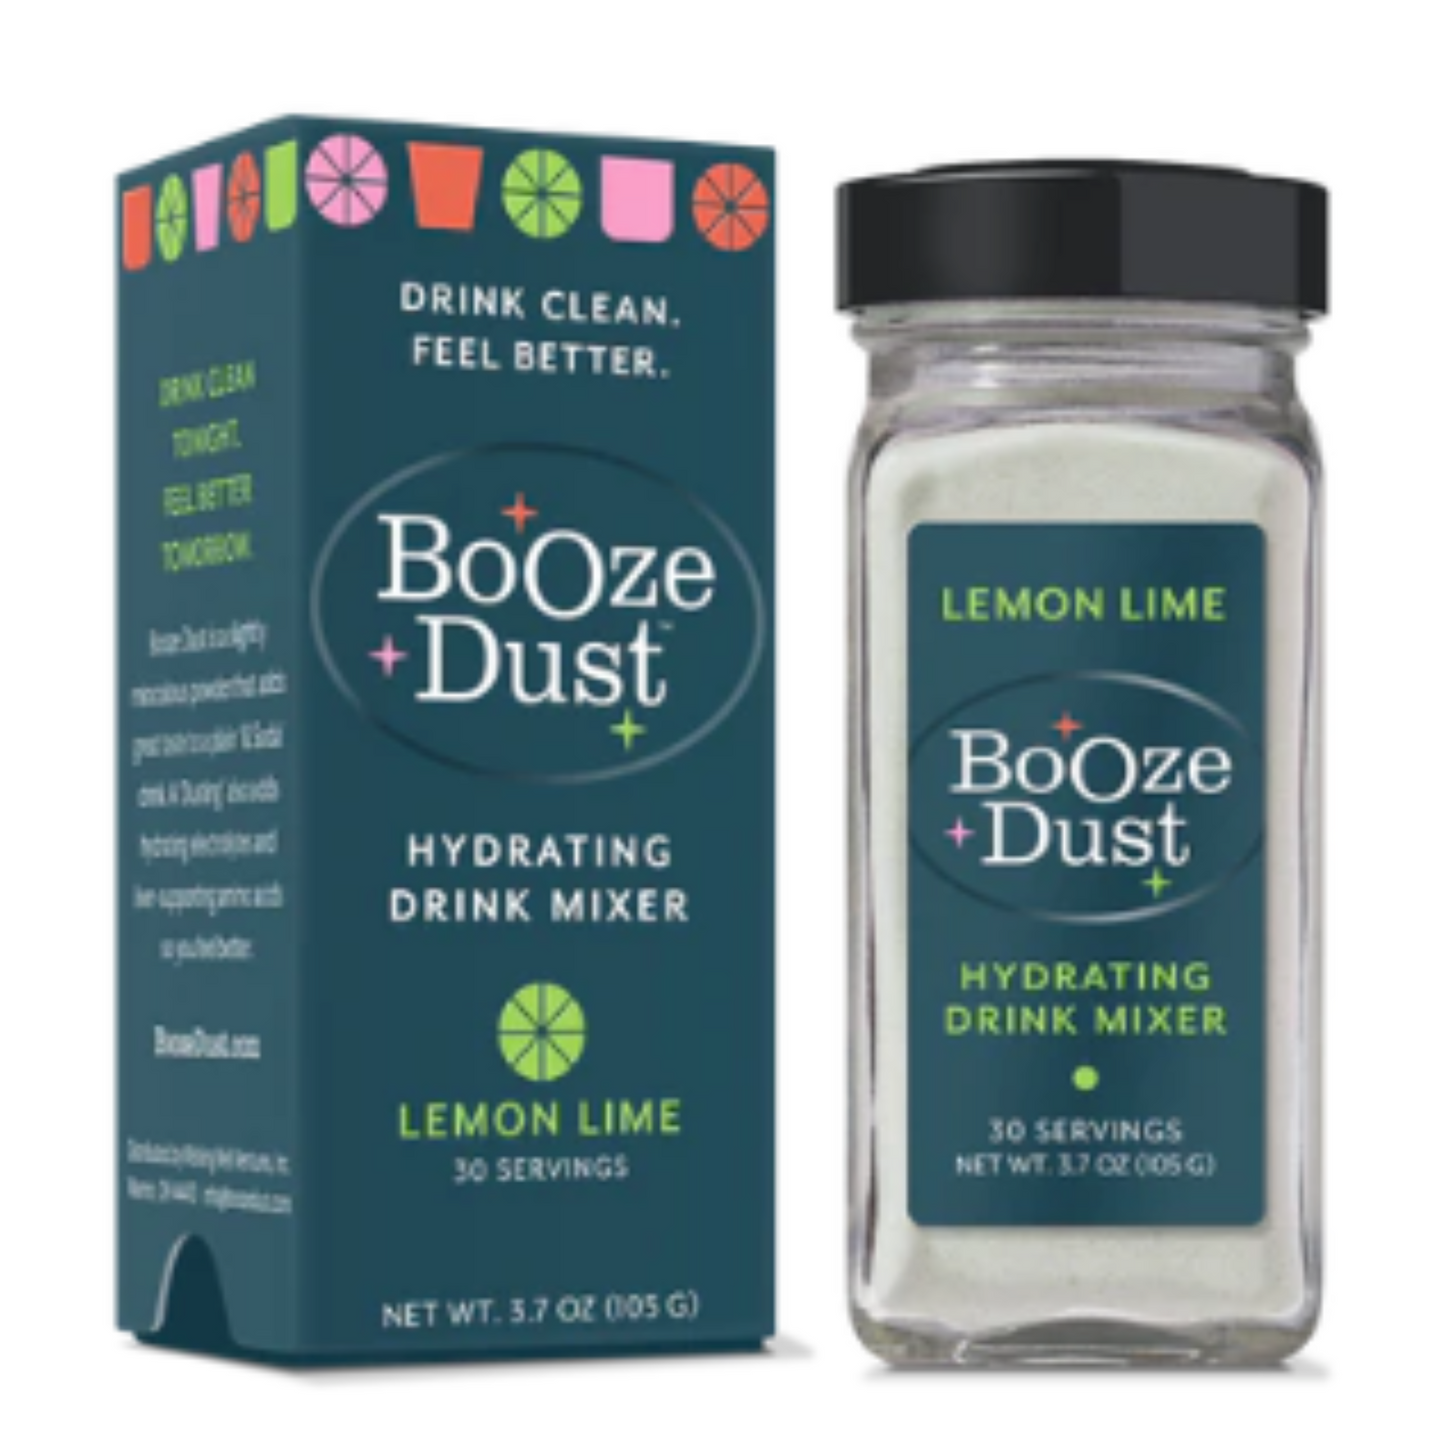 Booze Dust Hydrating Drink Mixer